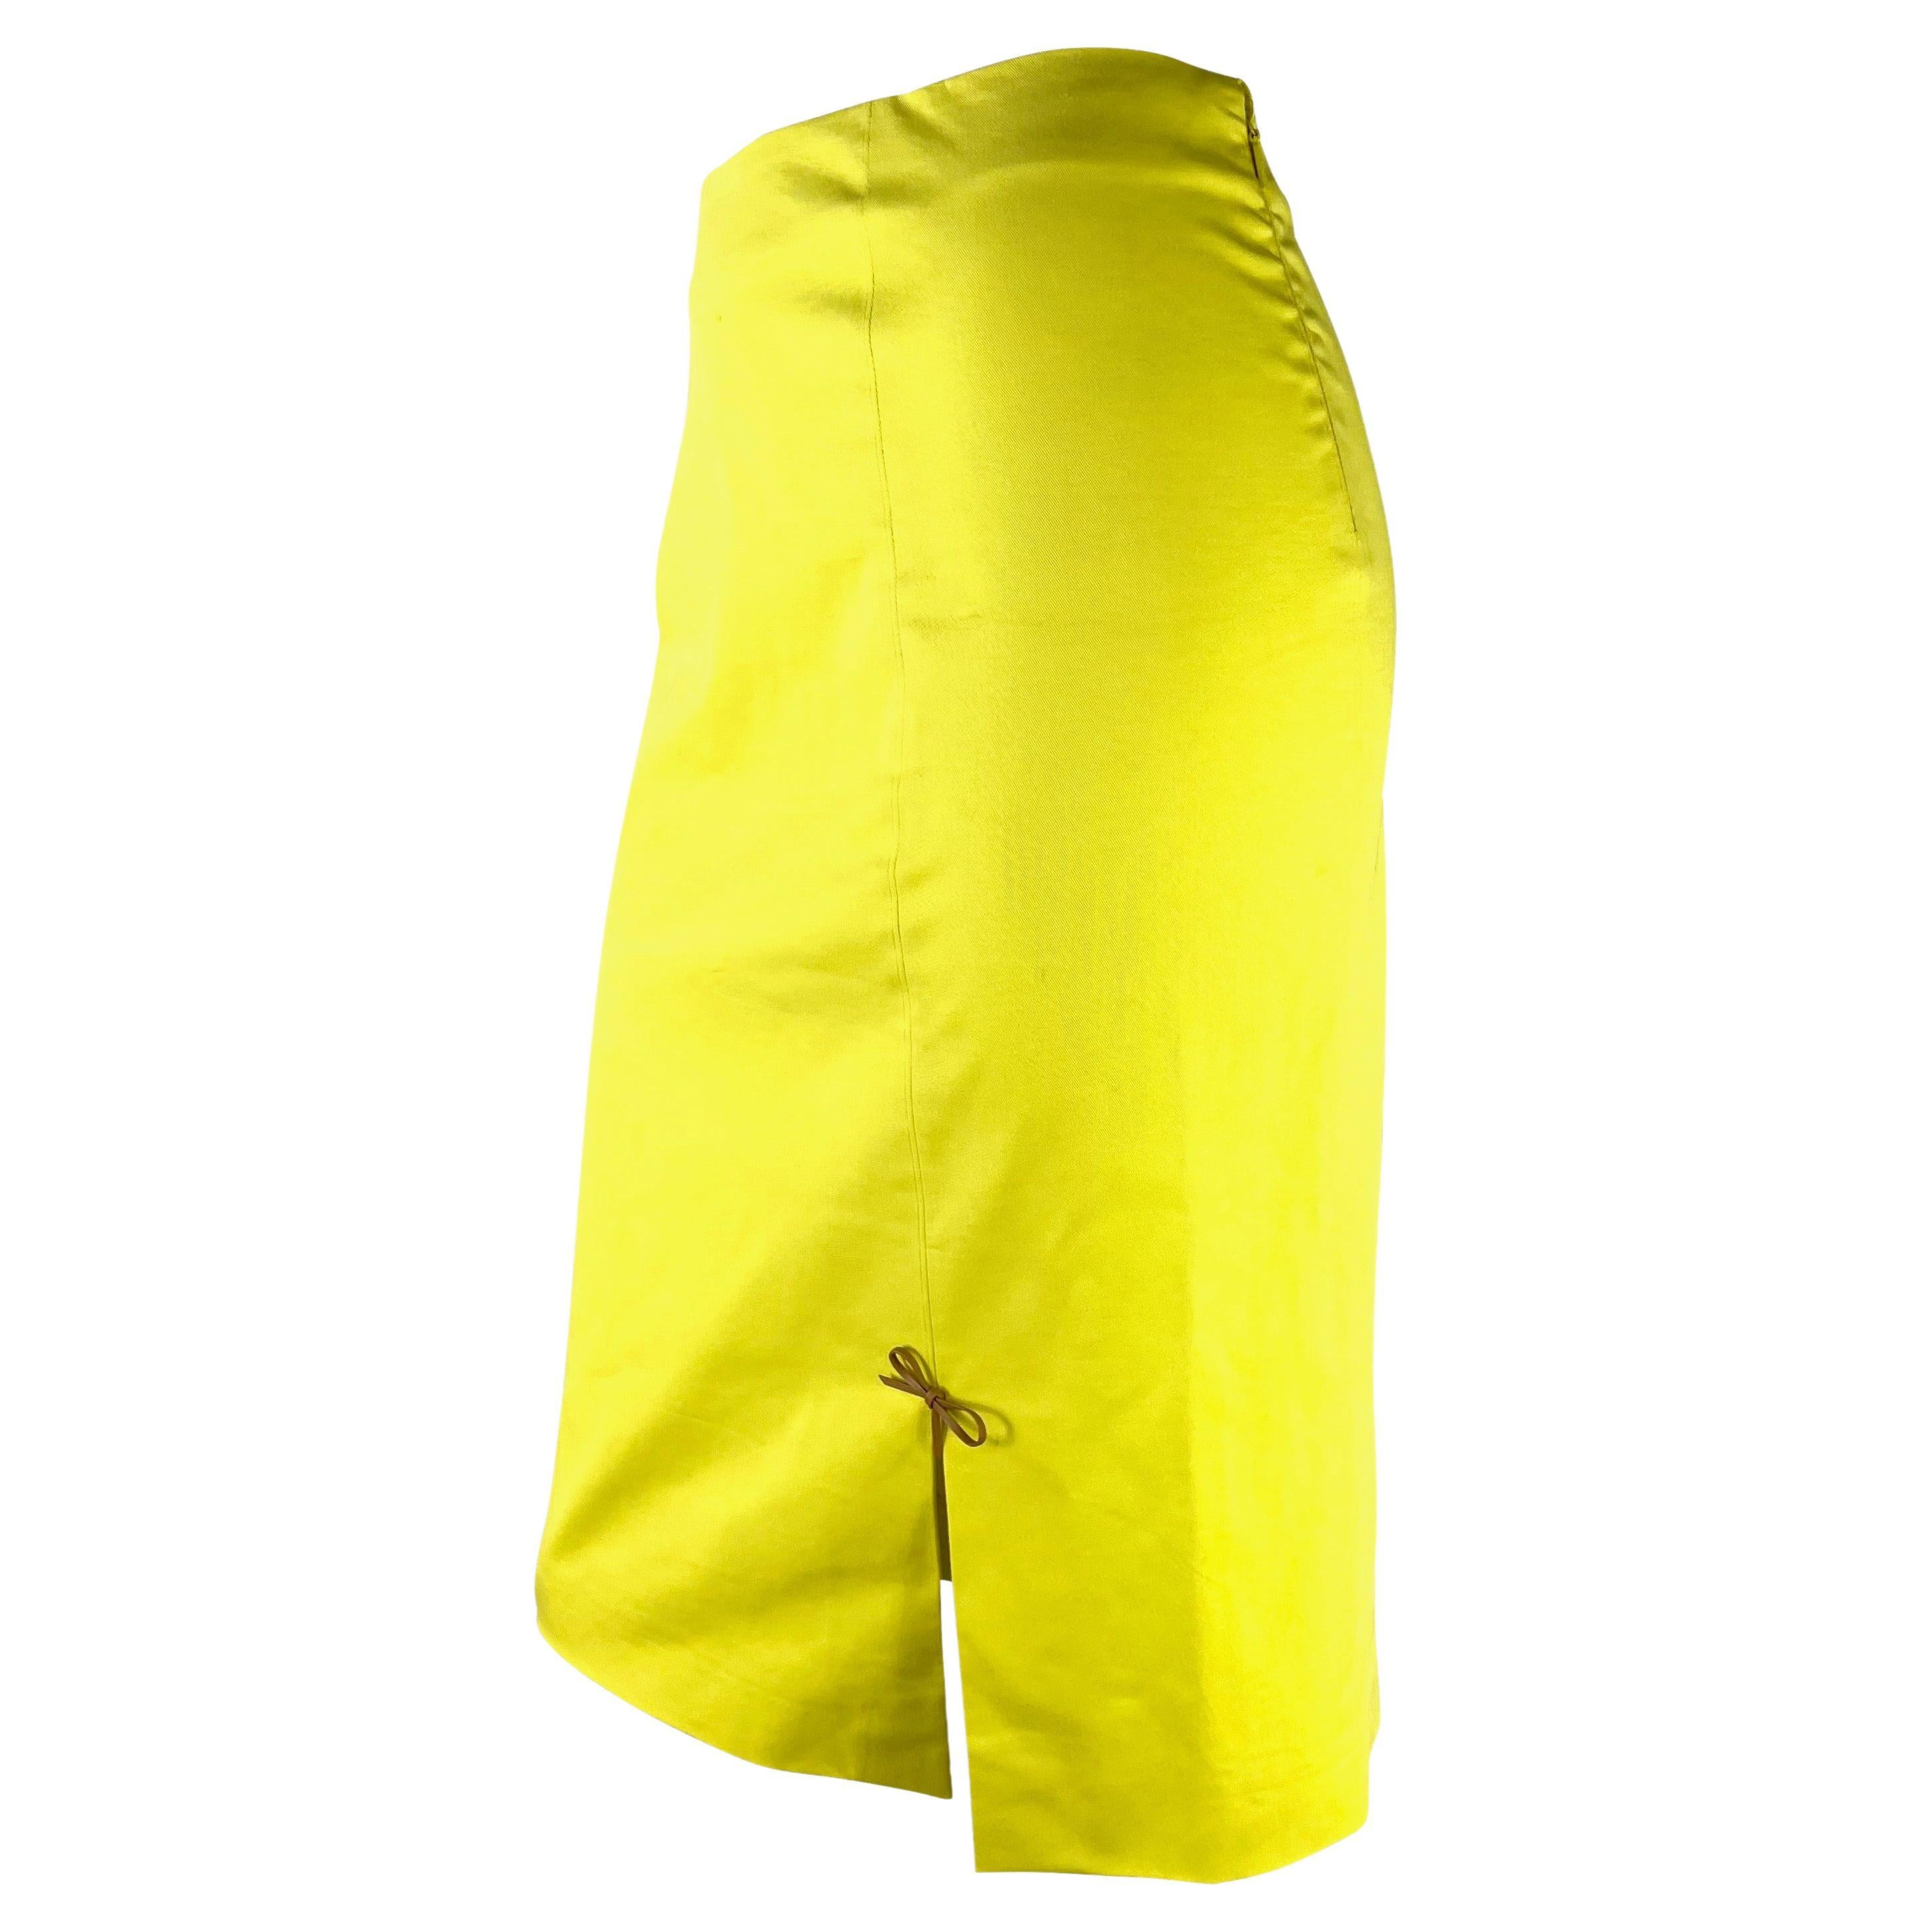 Presenting a bright yellow Gucci skirt, designed by Tom Ford. From the Spring/Summer 2000 collection, this pencil-style skirt features a slit at the front made complete with a small tan leather bow. 

Approximate measurements:
Size - IT40
28